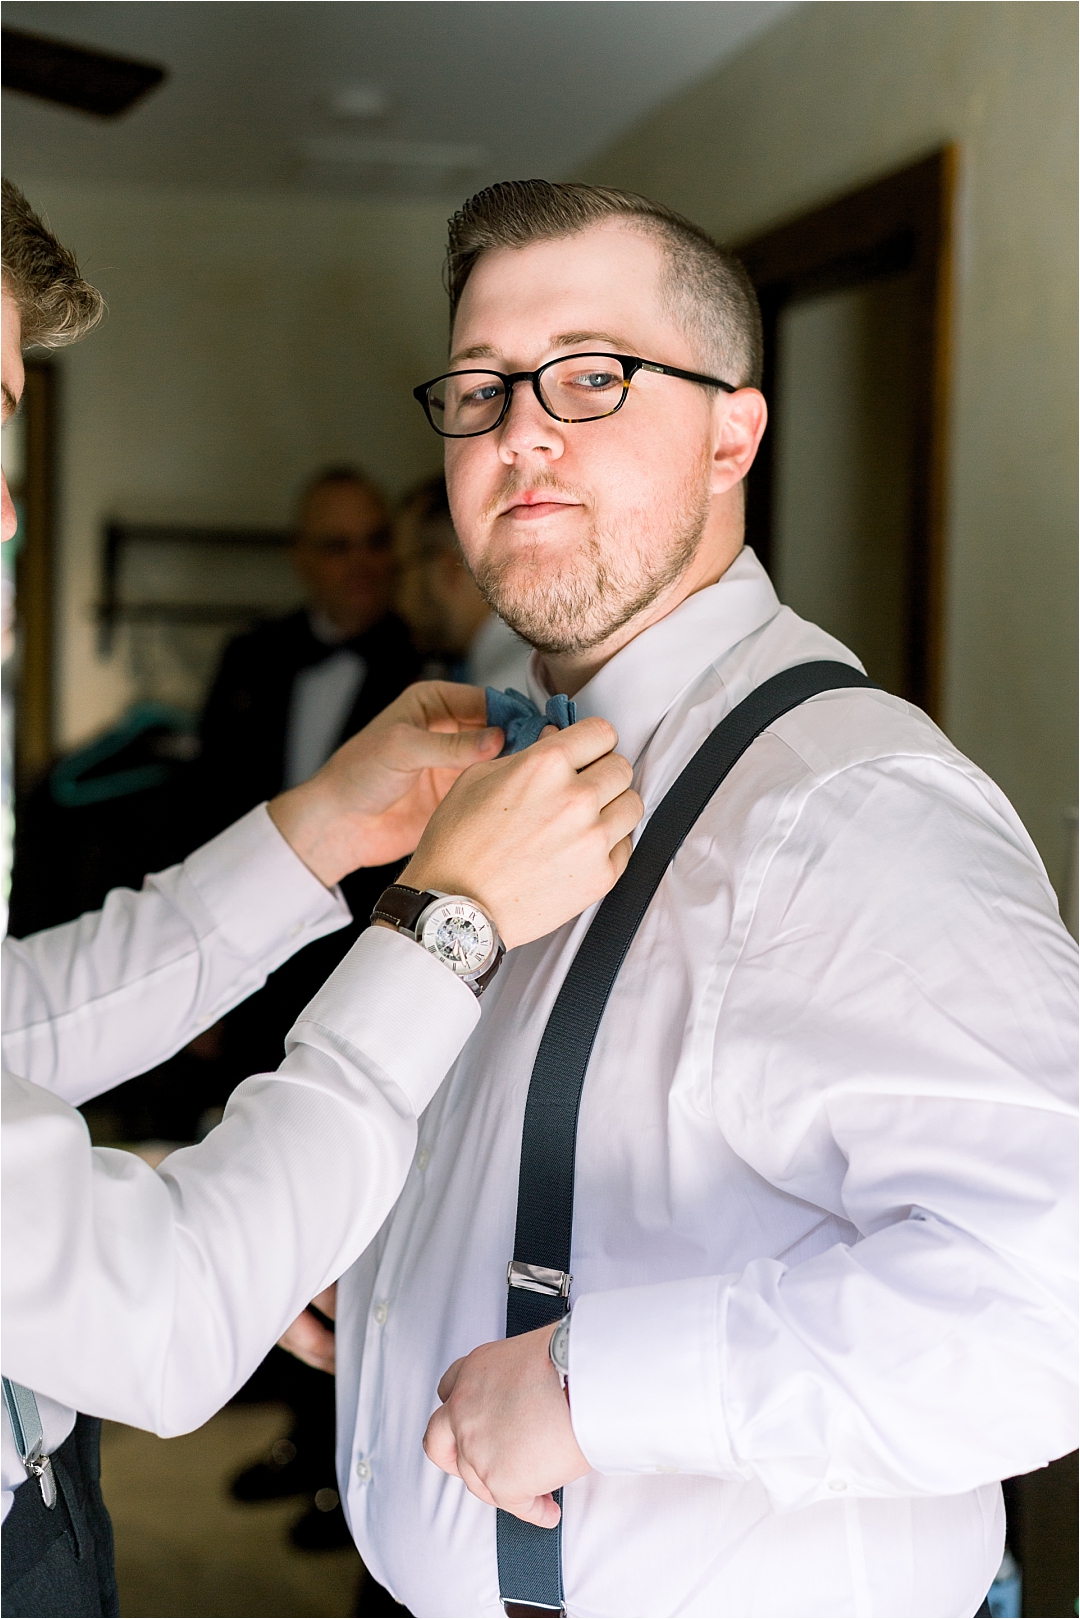 groom getting bowtie tied_Photos by Leigh Wolfe, Atlanta's Top Wedding Photographer